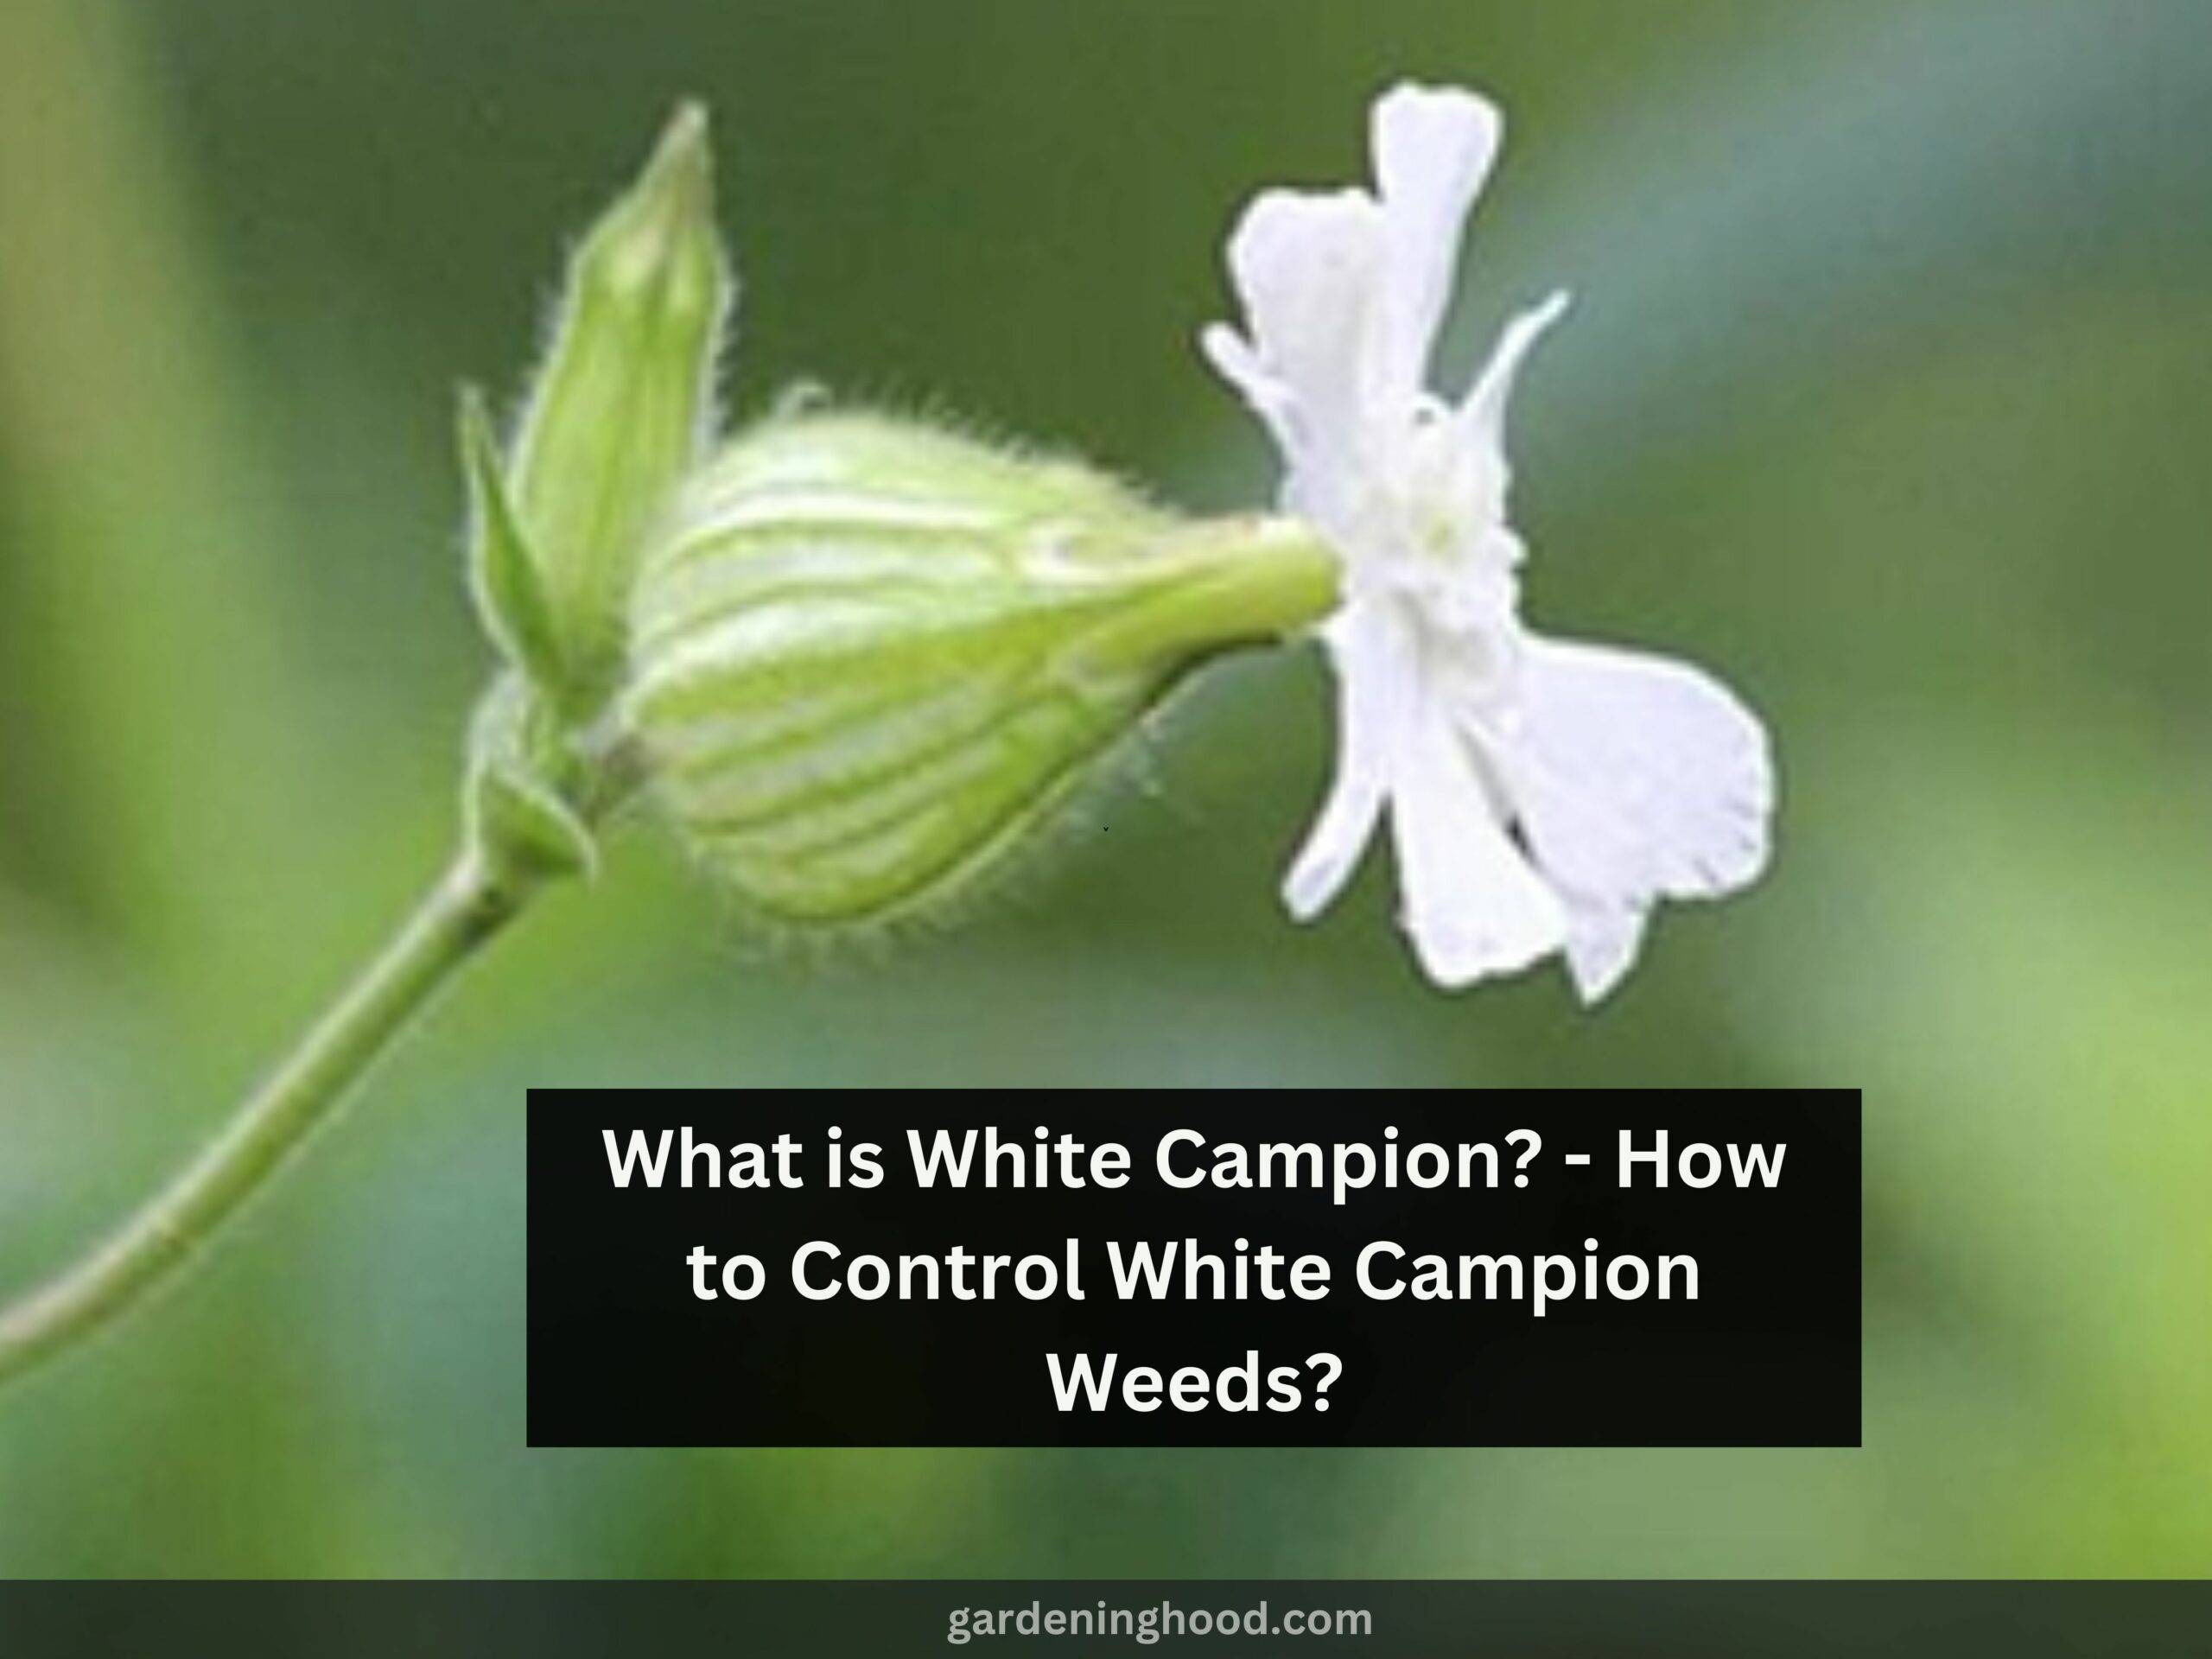 What is White Campion? - How to Control White Campion Weeds?